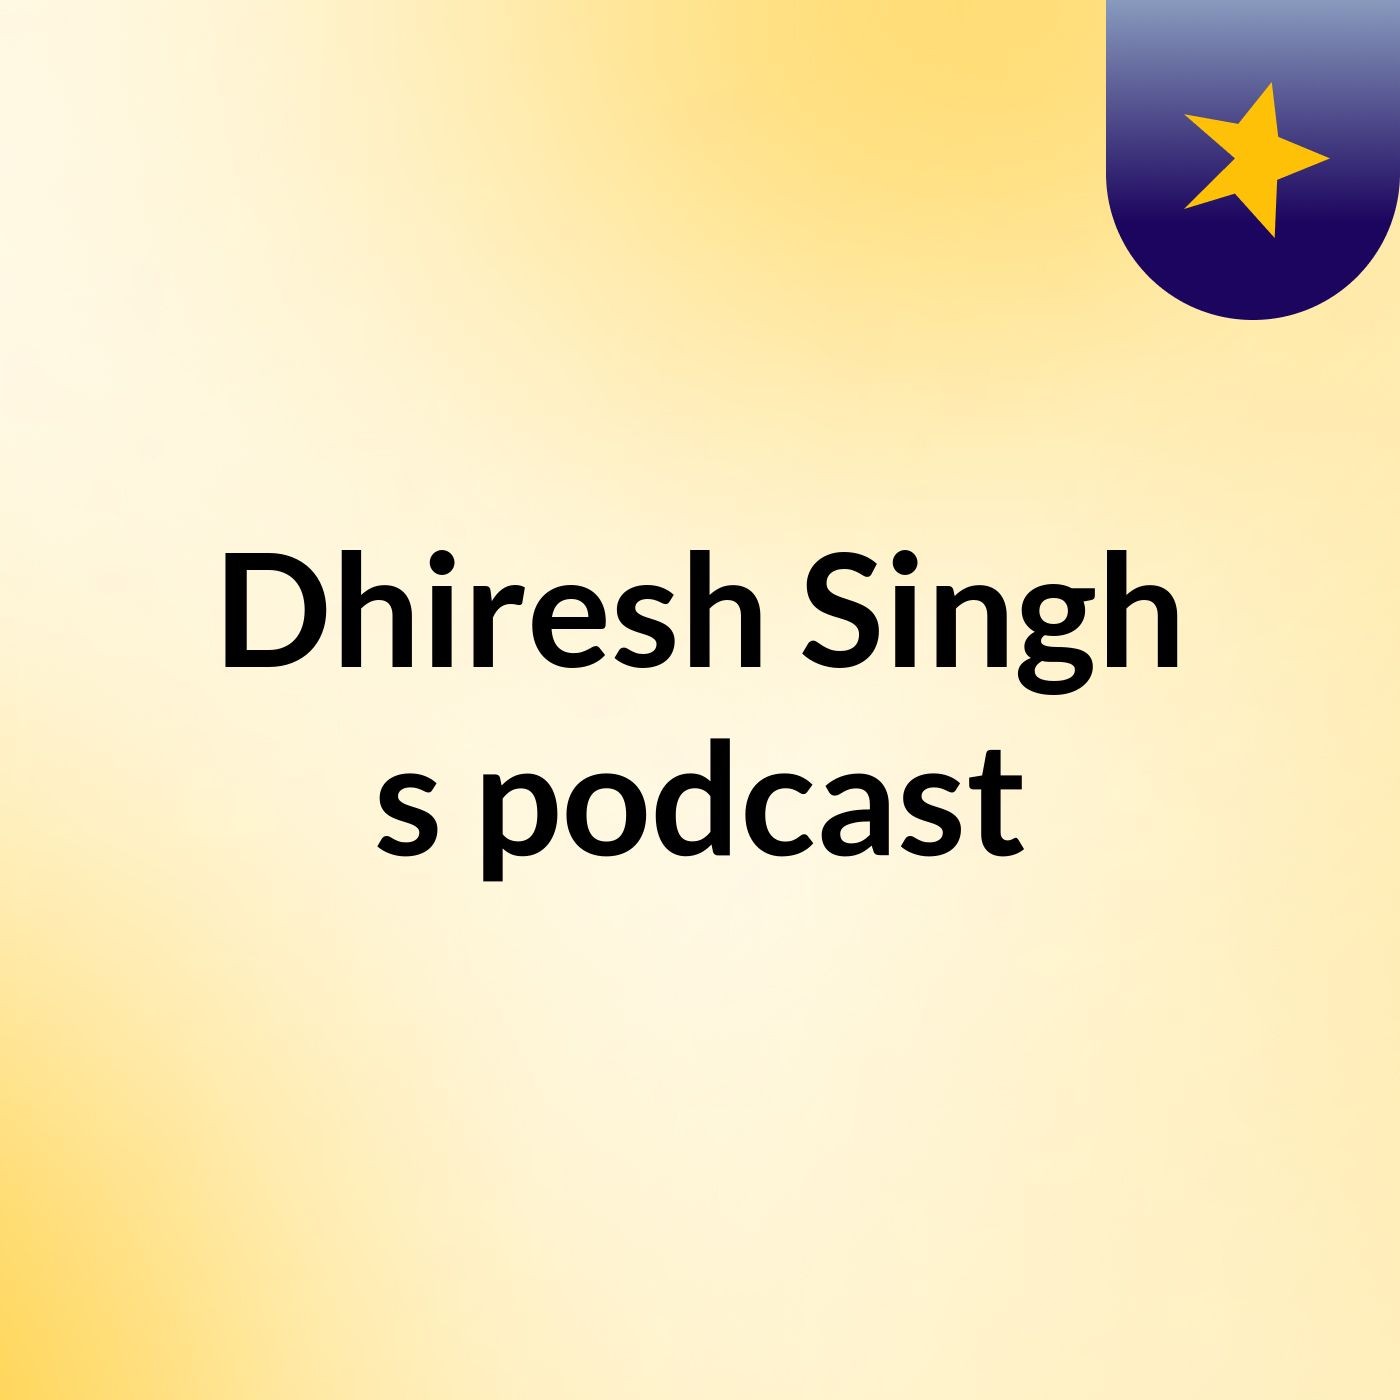 Episode 10 - Dhiresh Singh's podcast